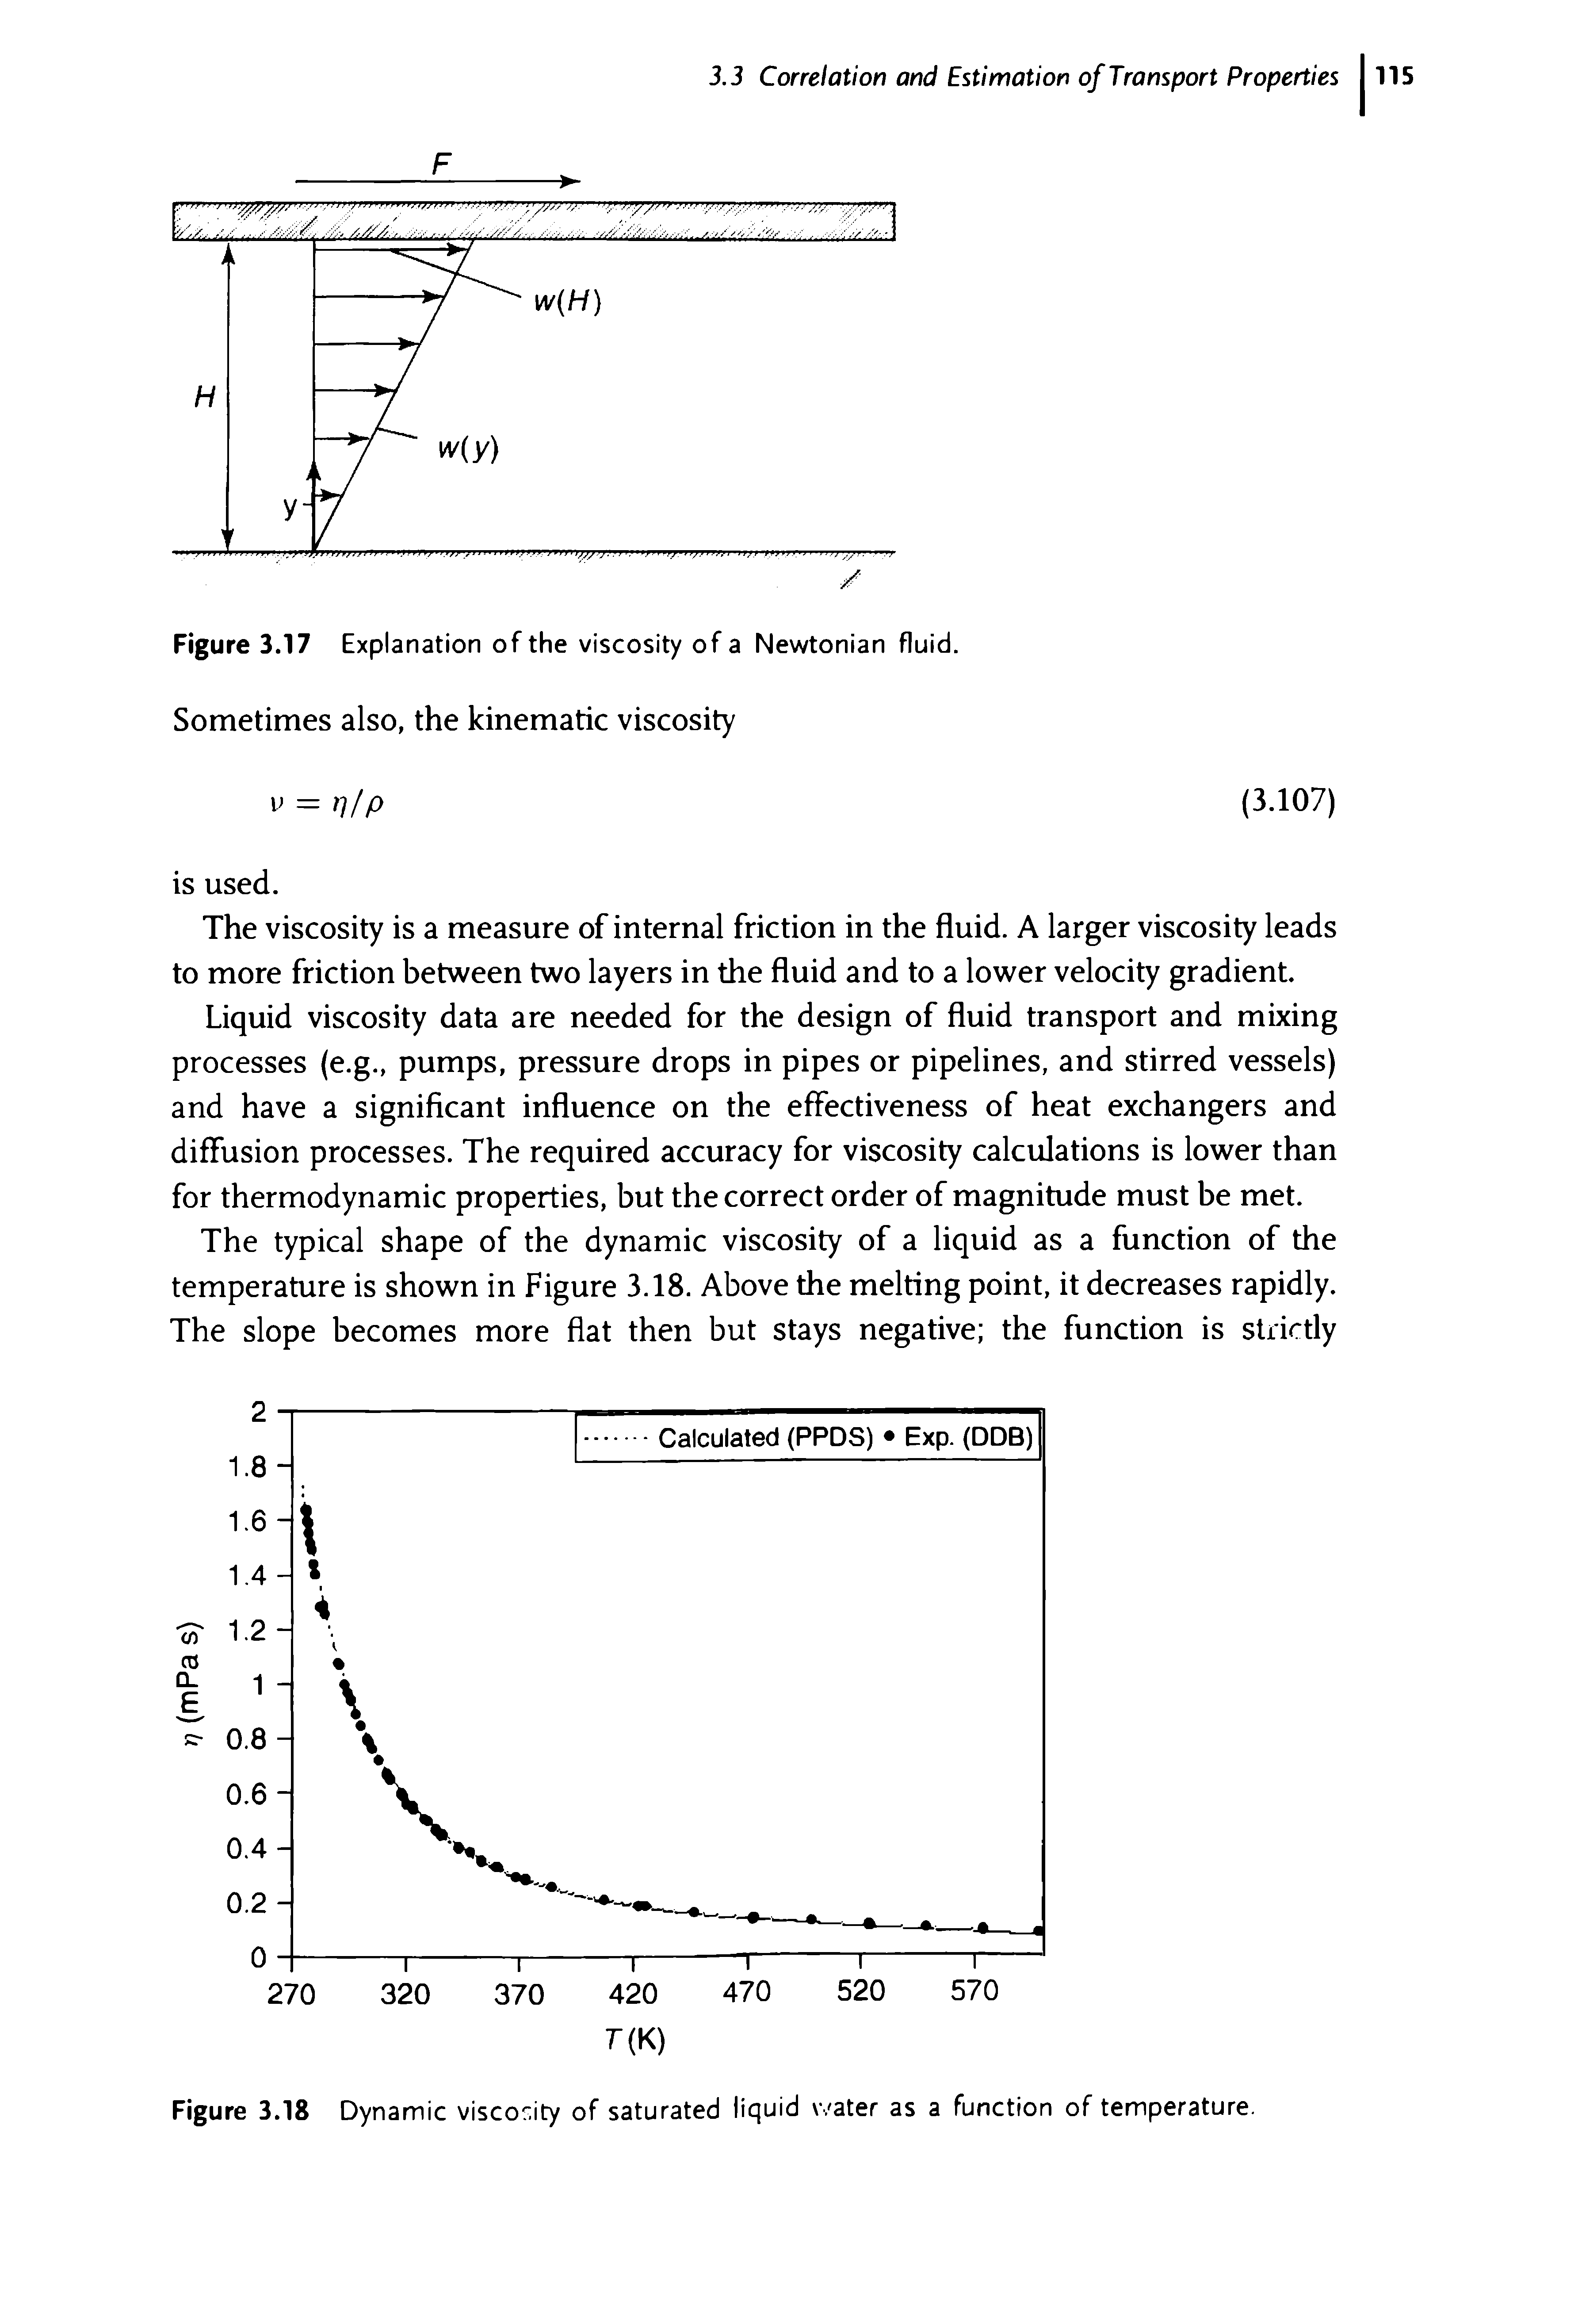 Figure 3.17 Explanation of the viscosity of a Newtonian fluid. Sometimes also, the kinematic viscosity...